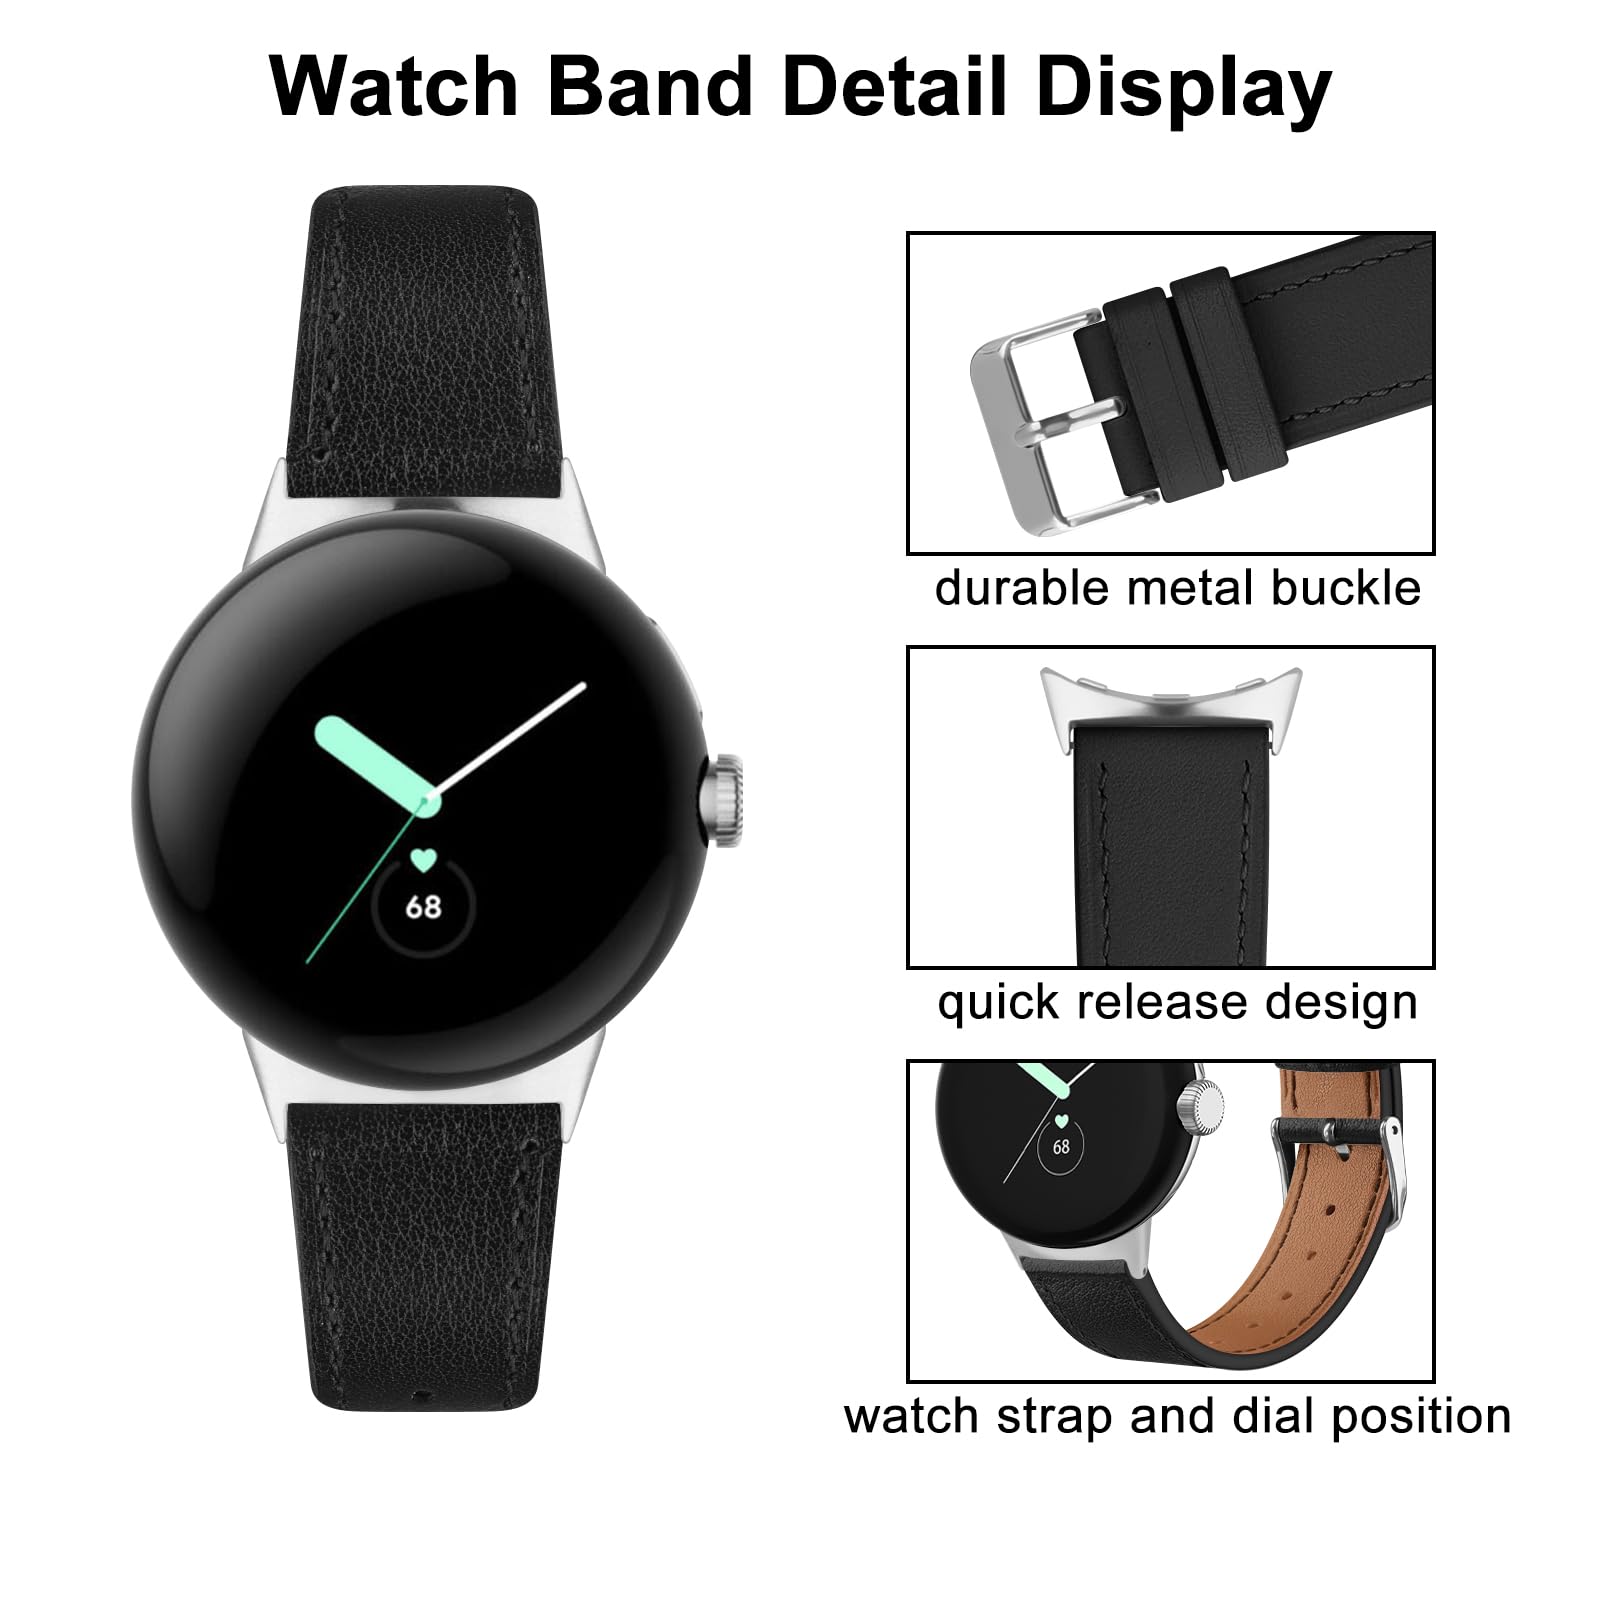 Vanjua Leather Band Compatible with Google Pixel Watch Bands for Women Men, Adjustable Wristband Replacement Strap for Google Pixel Watch Band (Black)